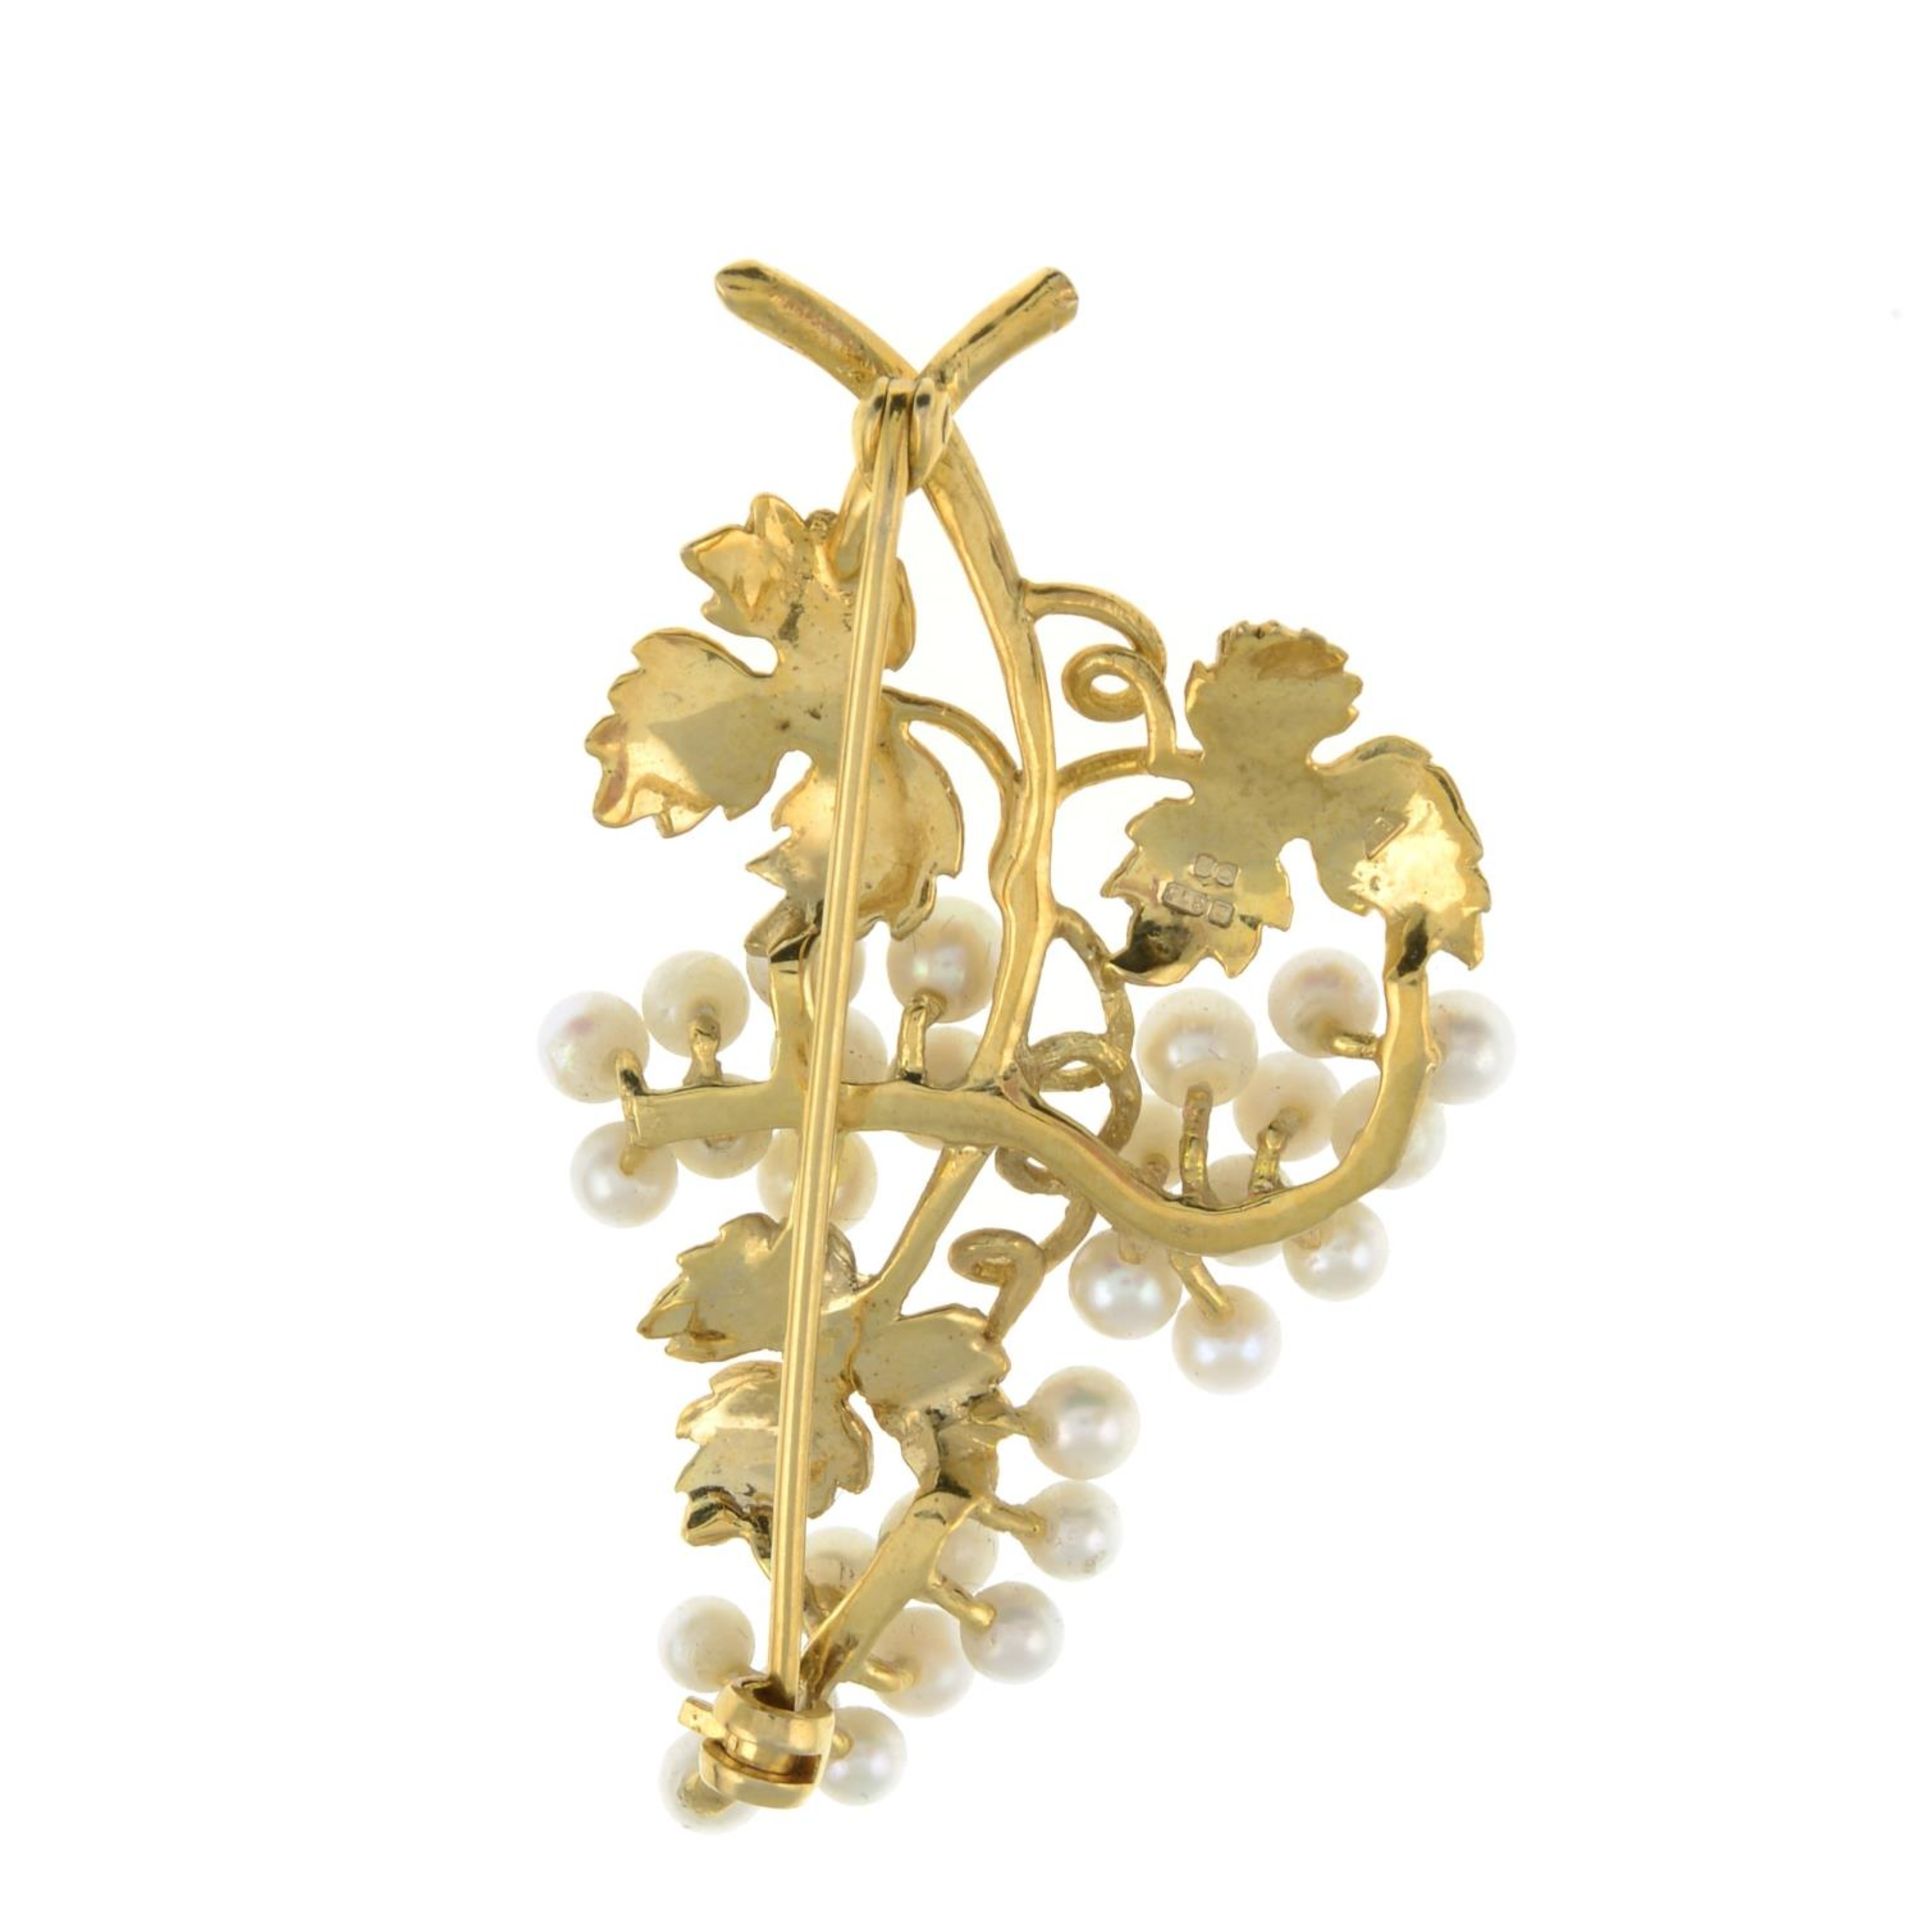 A 9ct gold cultured pearl grape brooch.Hallmarks for 9ct gold. - Image 2 of 2